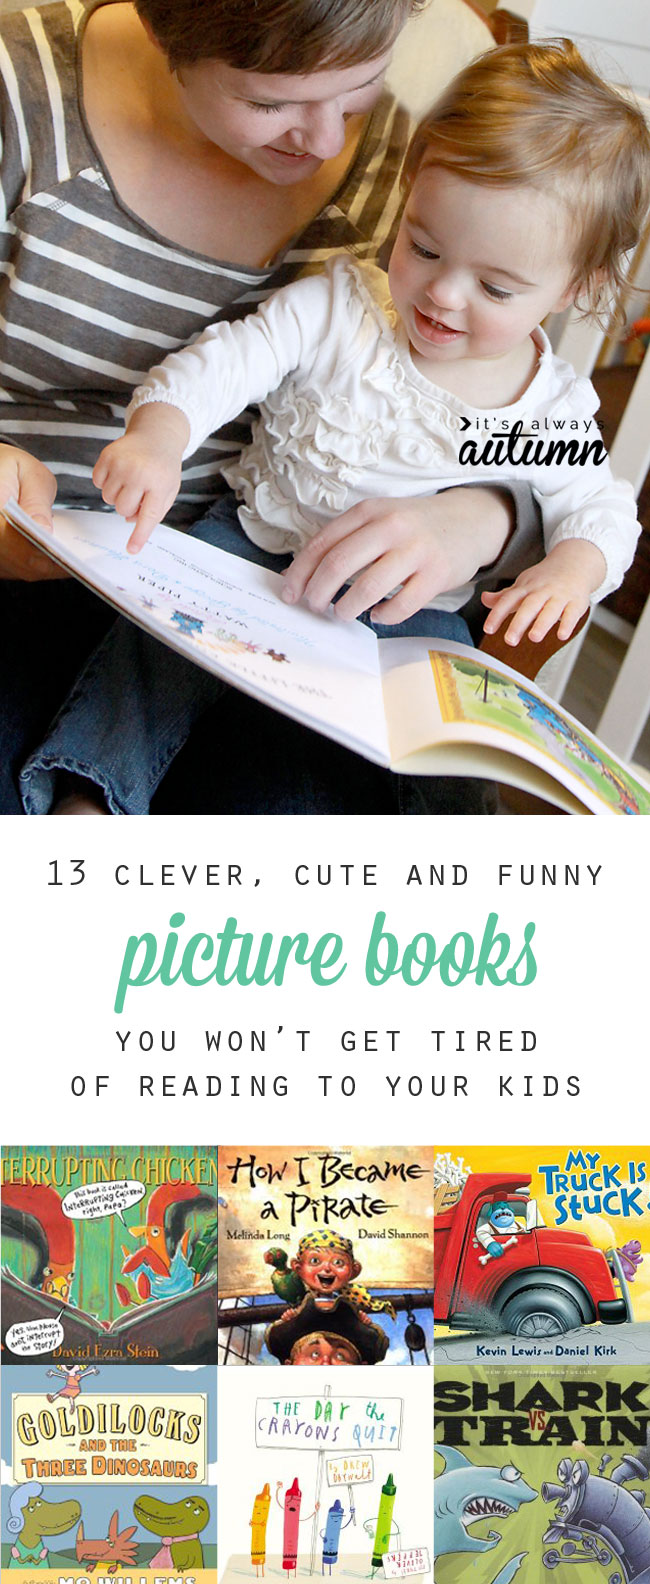 great list of the best funny, clever, and cute children's picture books - you won't get tired of reading these to your kids!